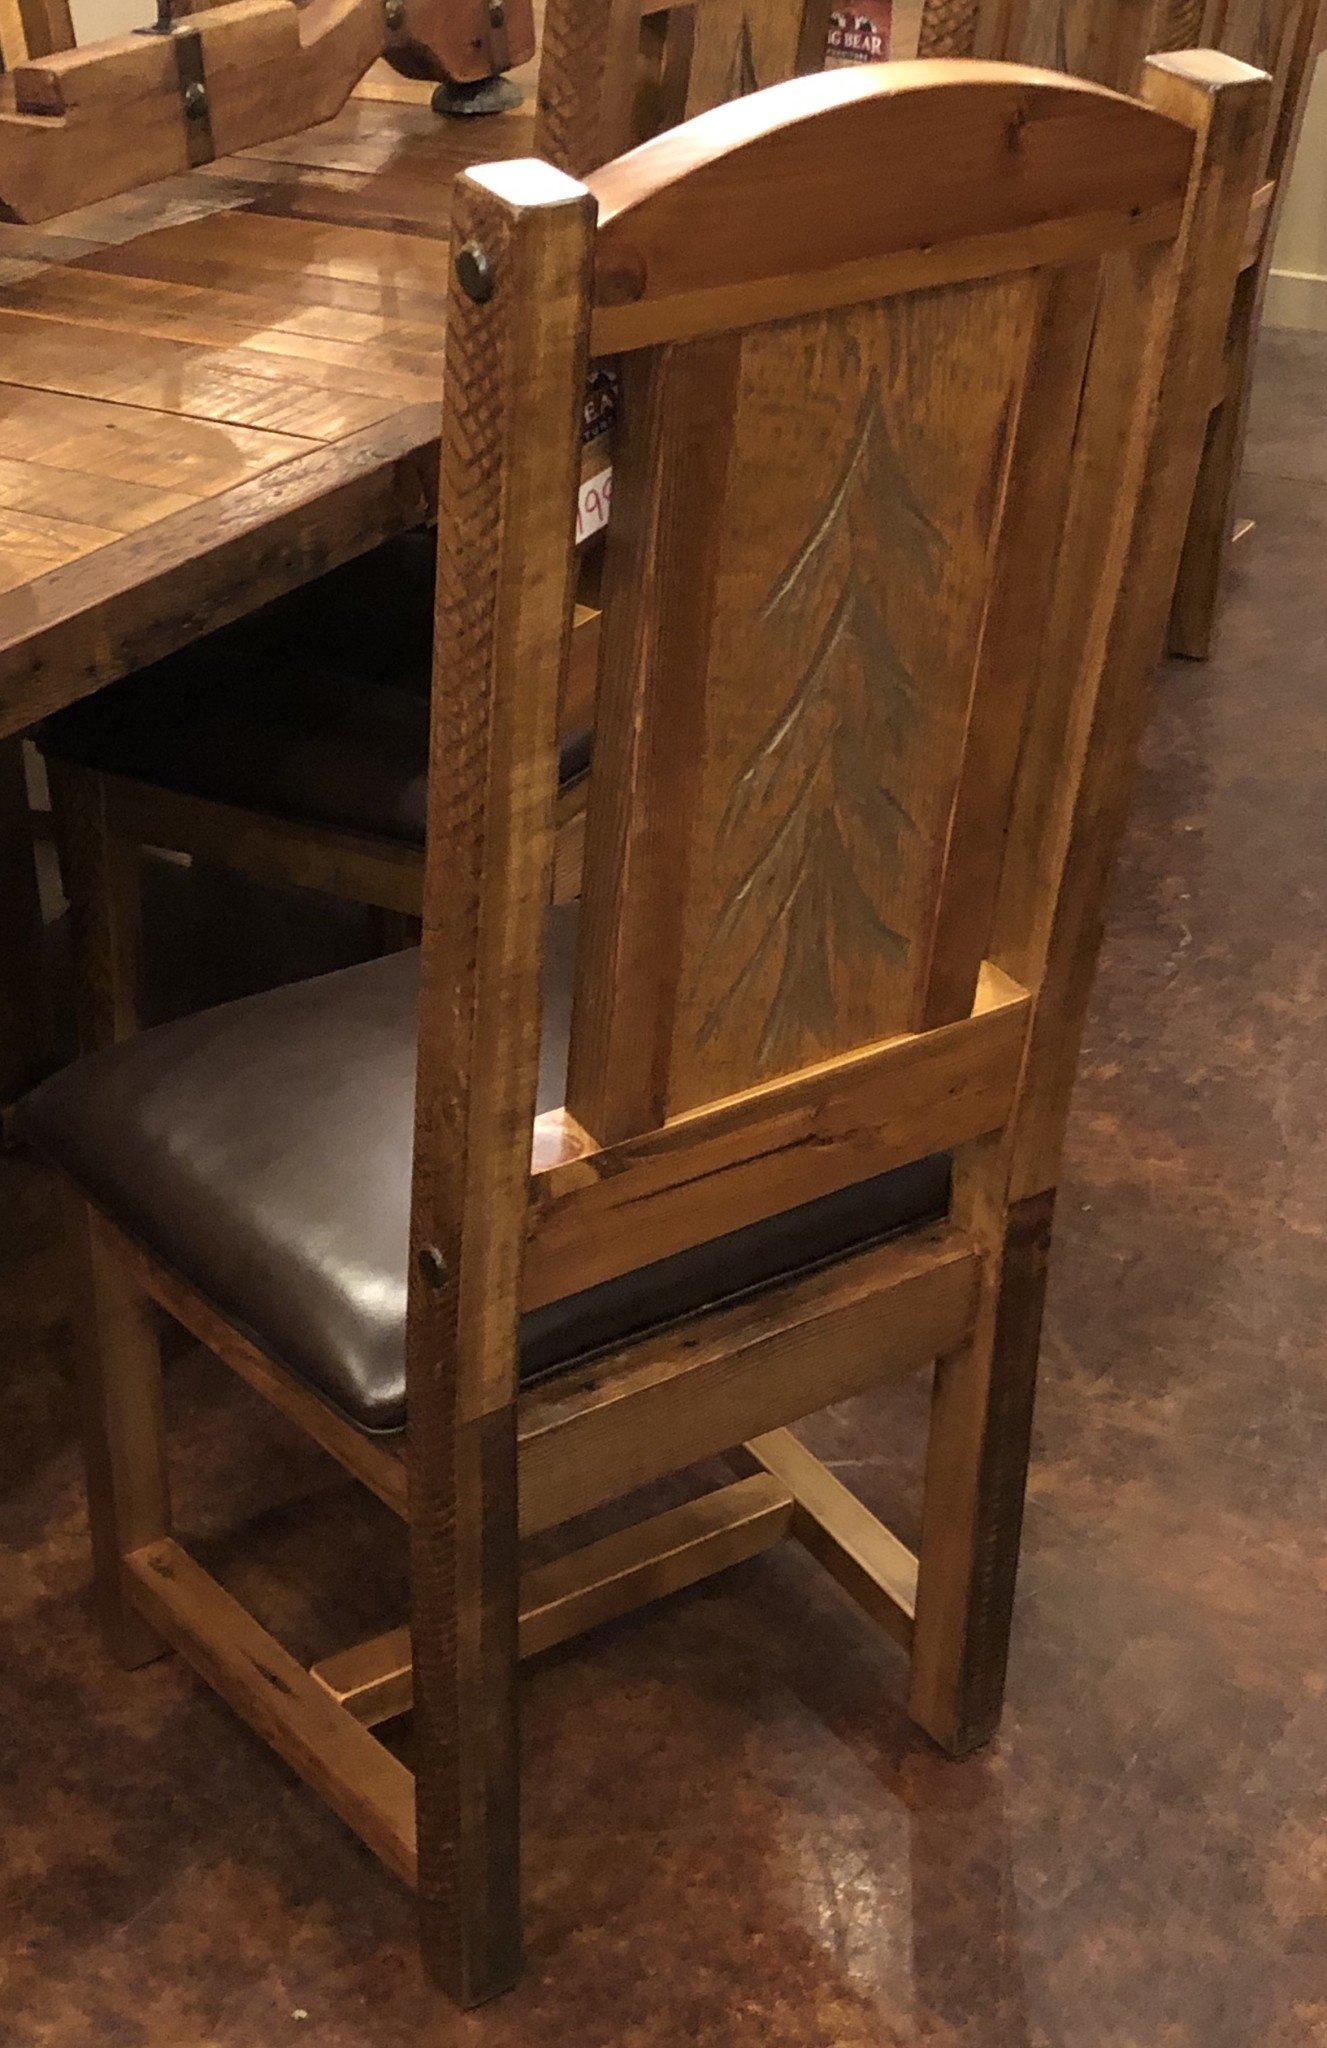 Sequoia Sequoia 45" Side Chair